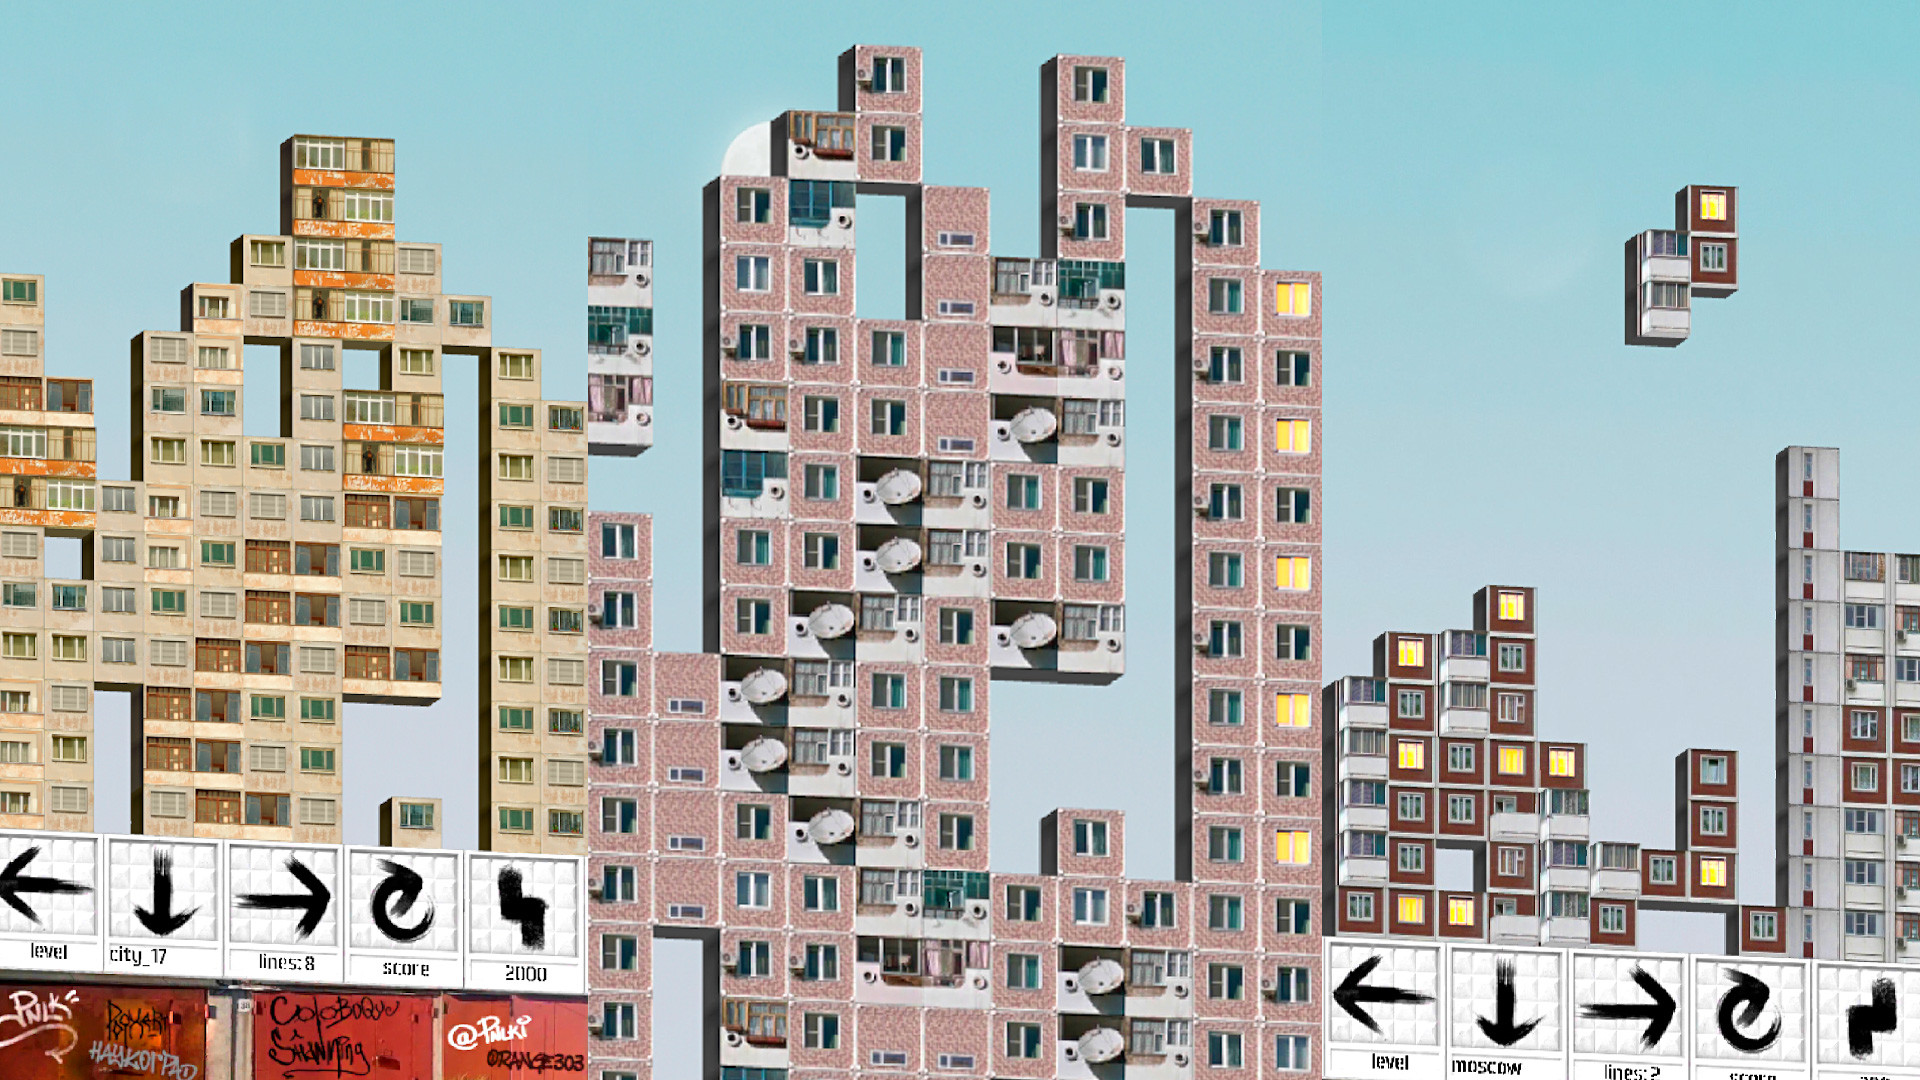 Russians make mobile Tetris with high-rise buildings as pieces - Russia  Beyond